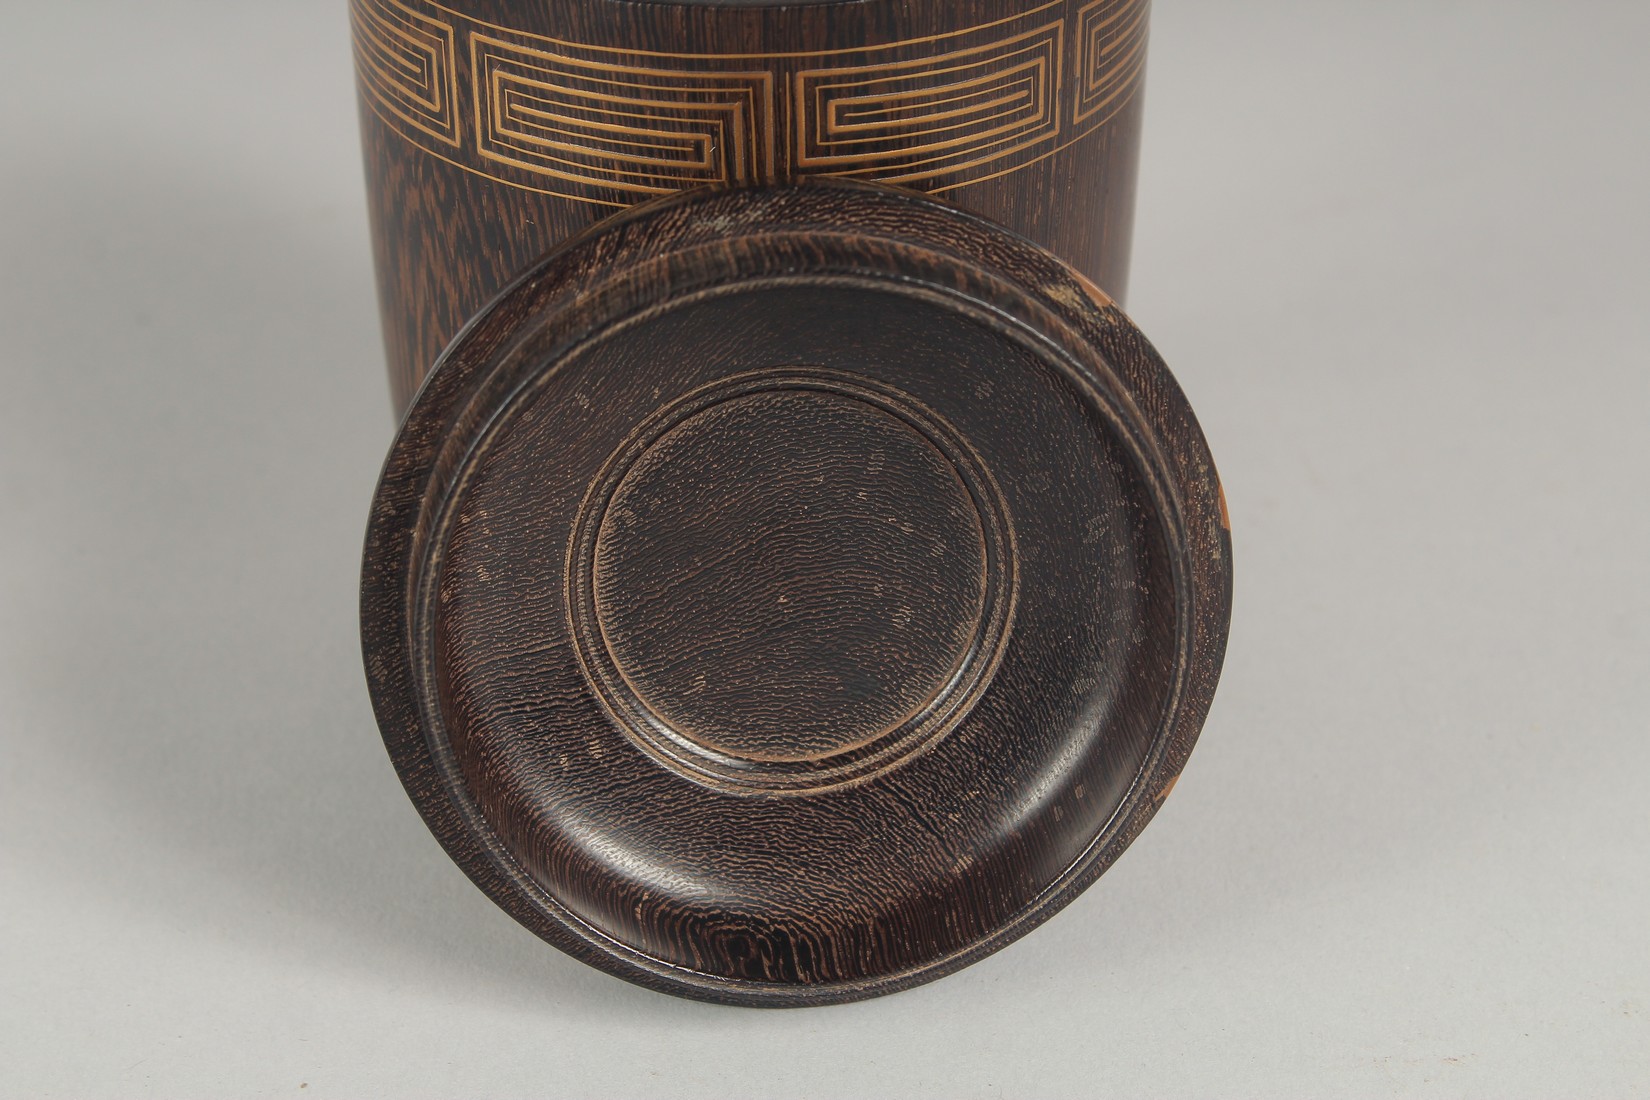 A FINE JAPANESE TURNED WOOD NATSUME / TEA CADDY, with a band of gilded key decoration to the lid and - Image 7 of 9